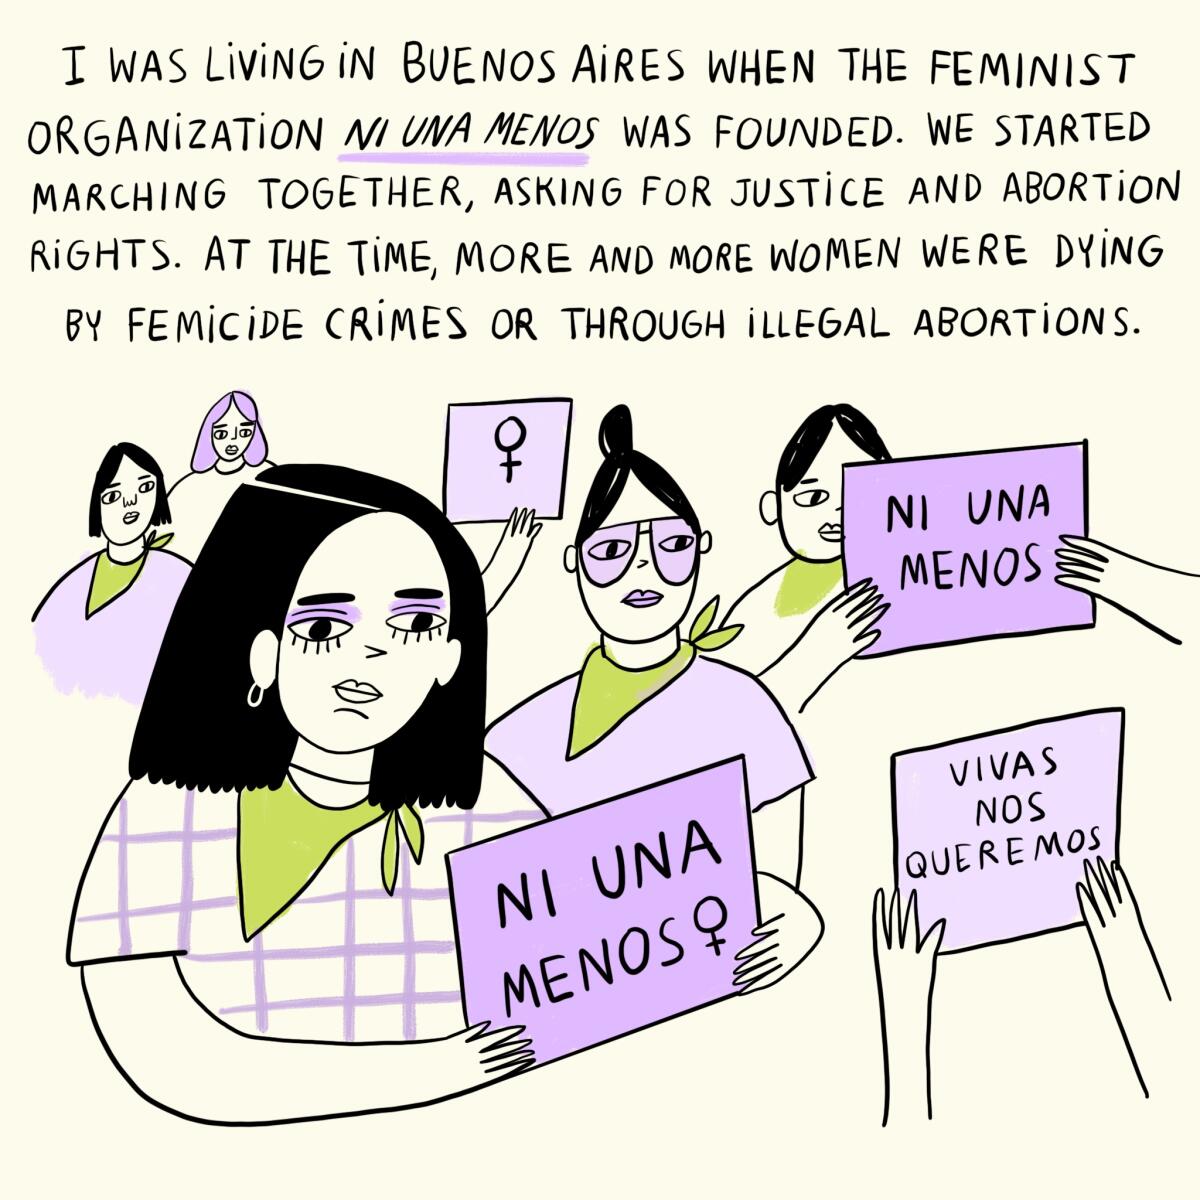 I was living in Buenos Aires when the feminist organization "Ni Una Menos" was founded. 